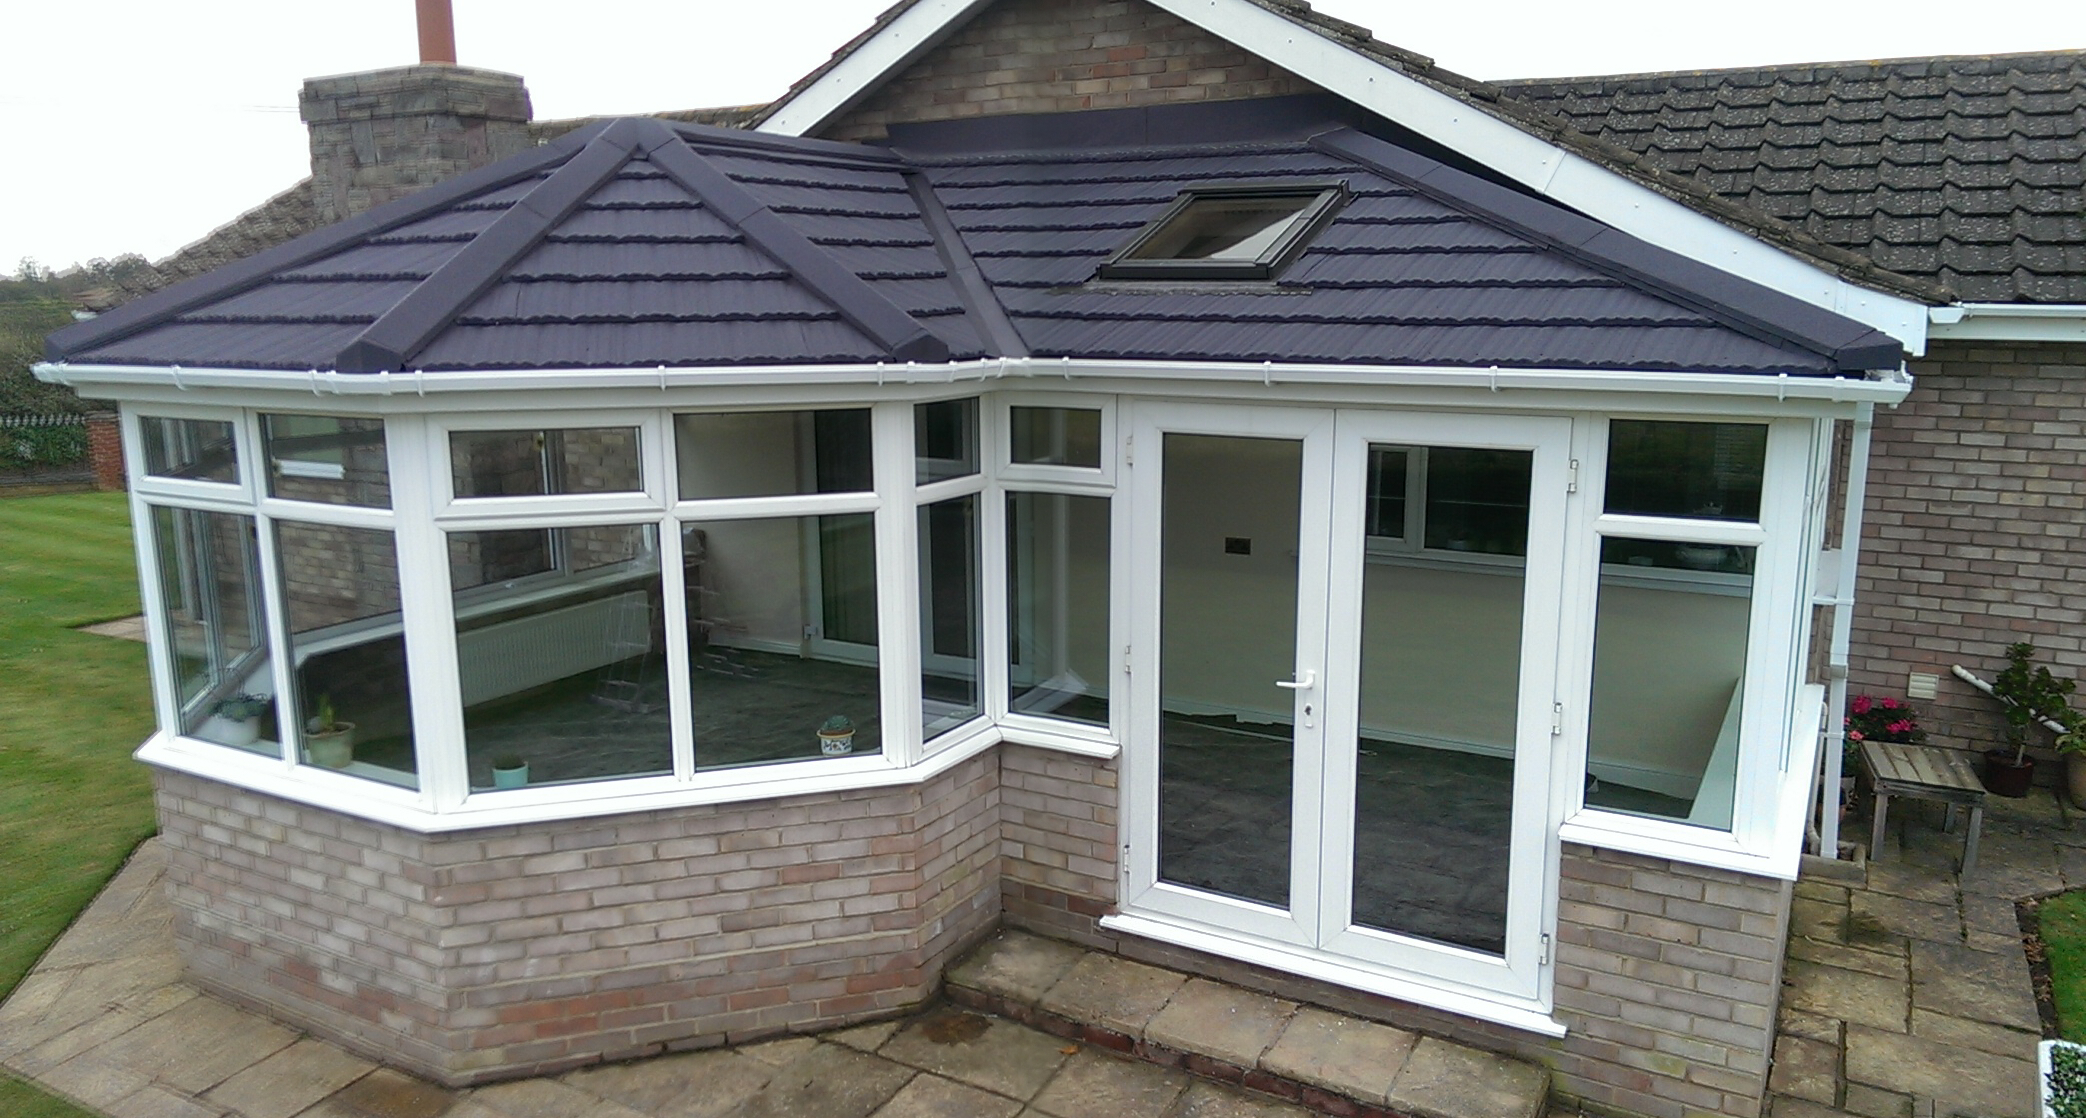 What is a P-Shaped Conservatory?